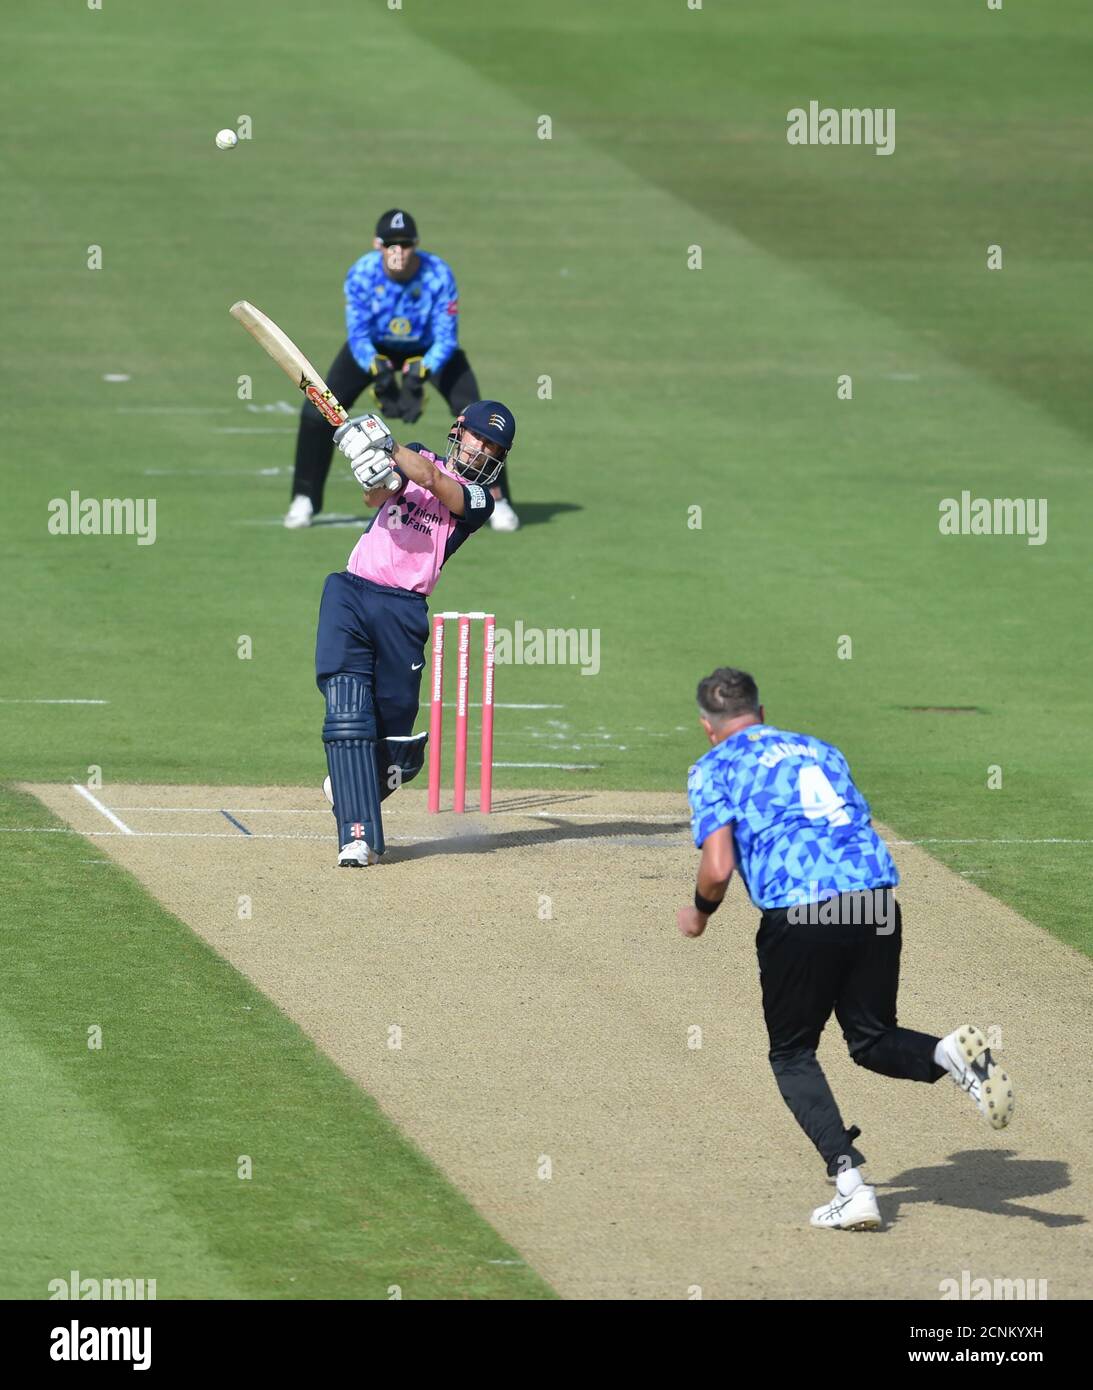 Hove UK 18th September 2020 - John Simpson of Middlesex hits out but is caught by George Garton on the boundary in the T20 Blast cricket match between Sussex Sharks and Middlesex  taking place behind closed doors at The 1st Central County Ground in Hove : Credit Simon Dack / Alamy Live News Stock Photo